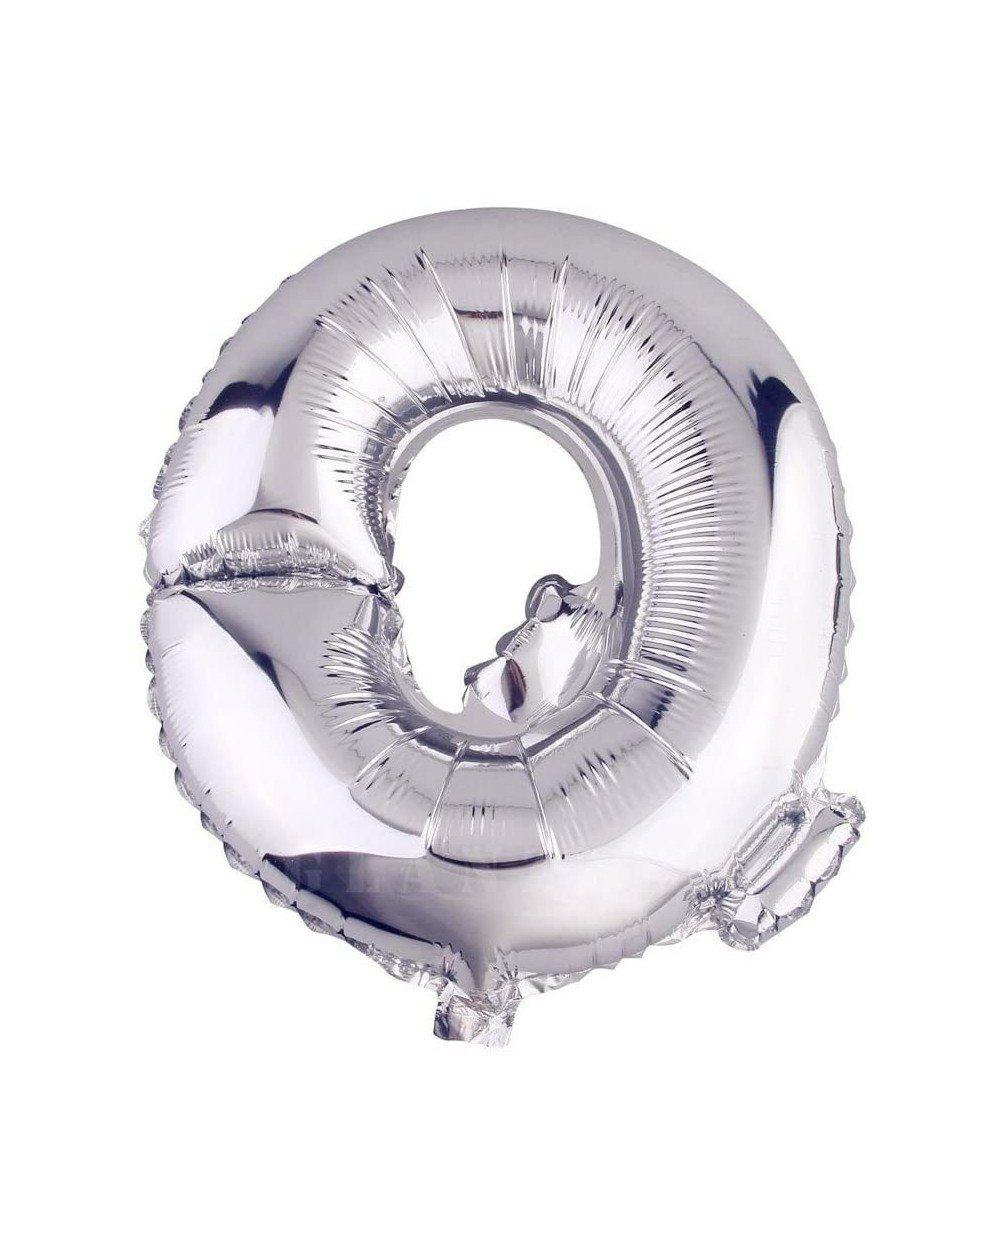 Balloons 16 Inch Silver Foil Balloons Letters A to Z Numbers 0 to 9 for Prom Wedding Birthday Party Decor (Letter Q) - Letter...